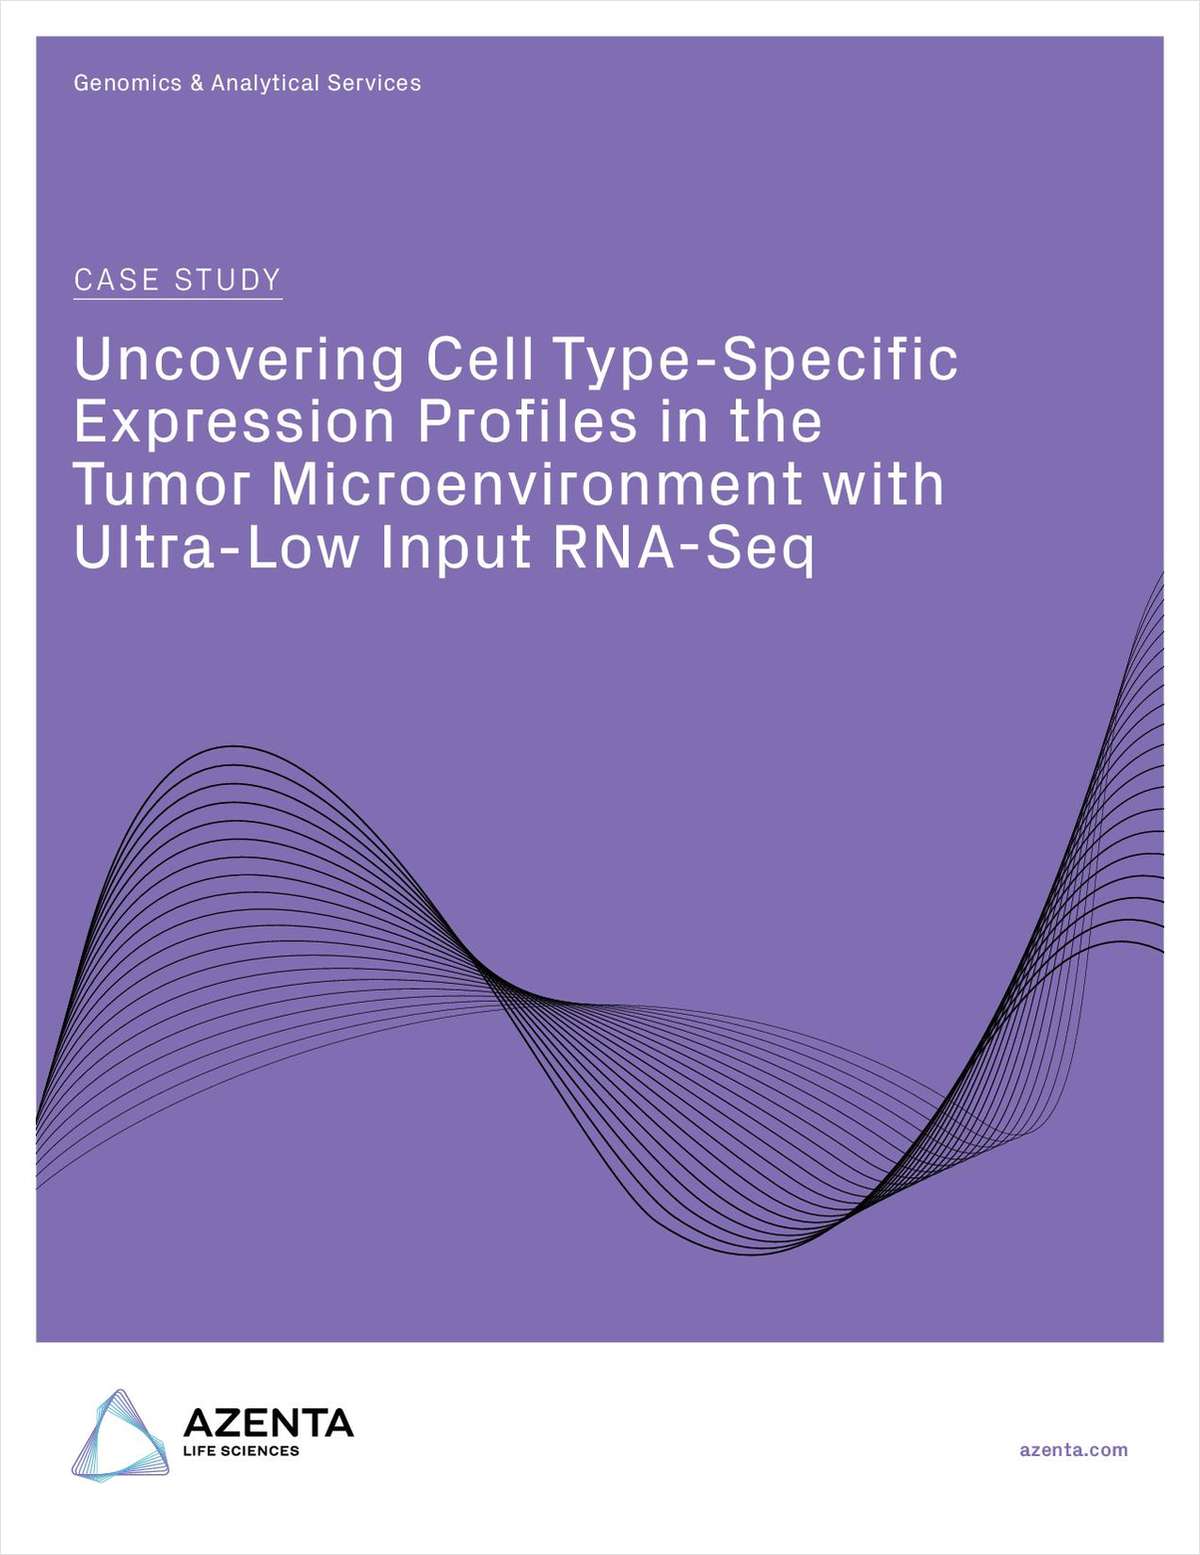 Uncovering Cell Type-Specific Expression Profiles in the Tumor Microenvironment with Ultra-Low Input RNA-Seq